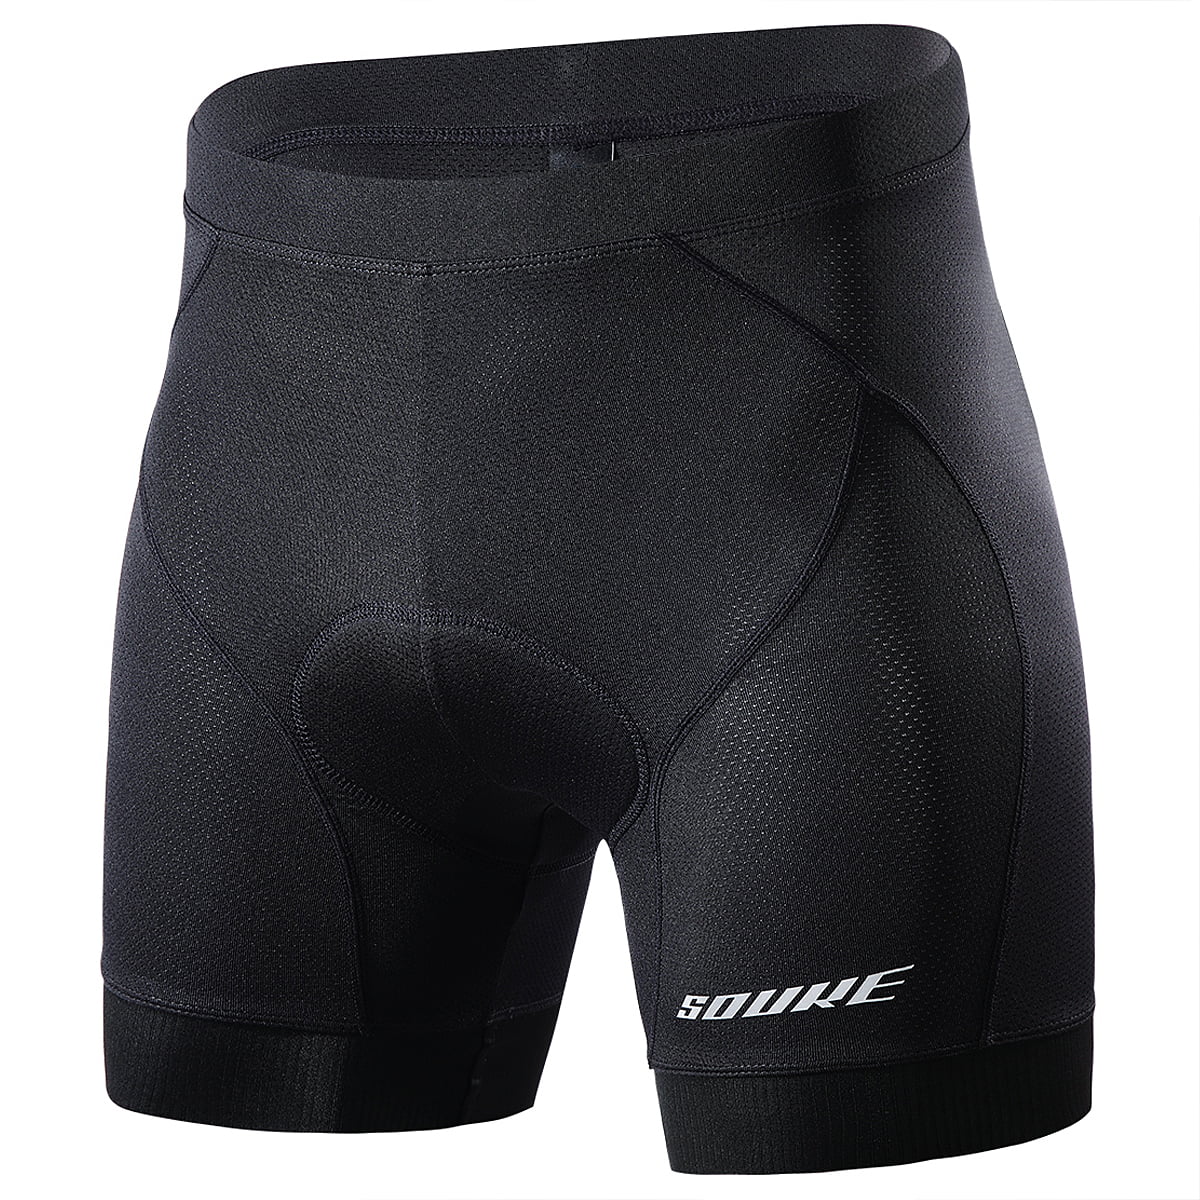 Souke Sports Mens Cycling Underwear Shorts 4D Padded Bike Bicycle MTB Liner Shorts with Anti-Slip Leg Grips